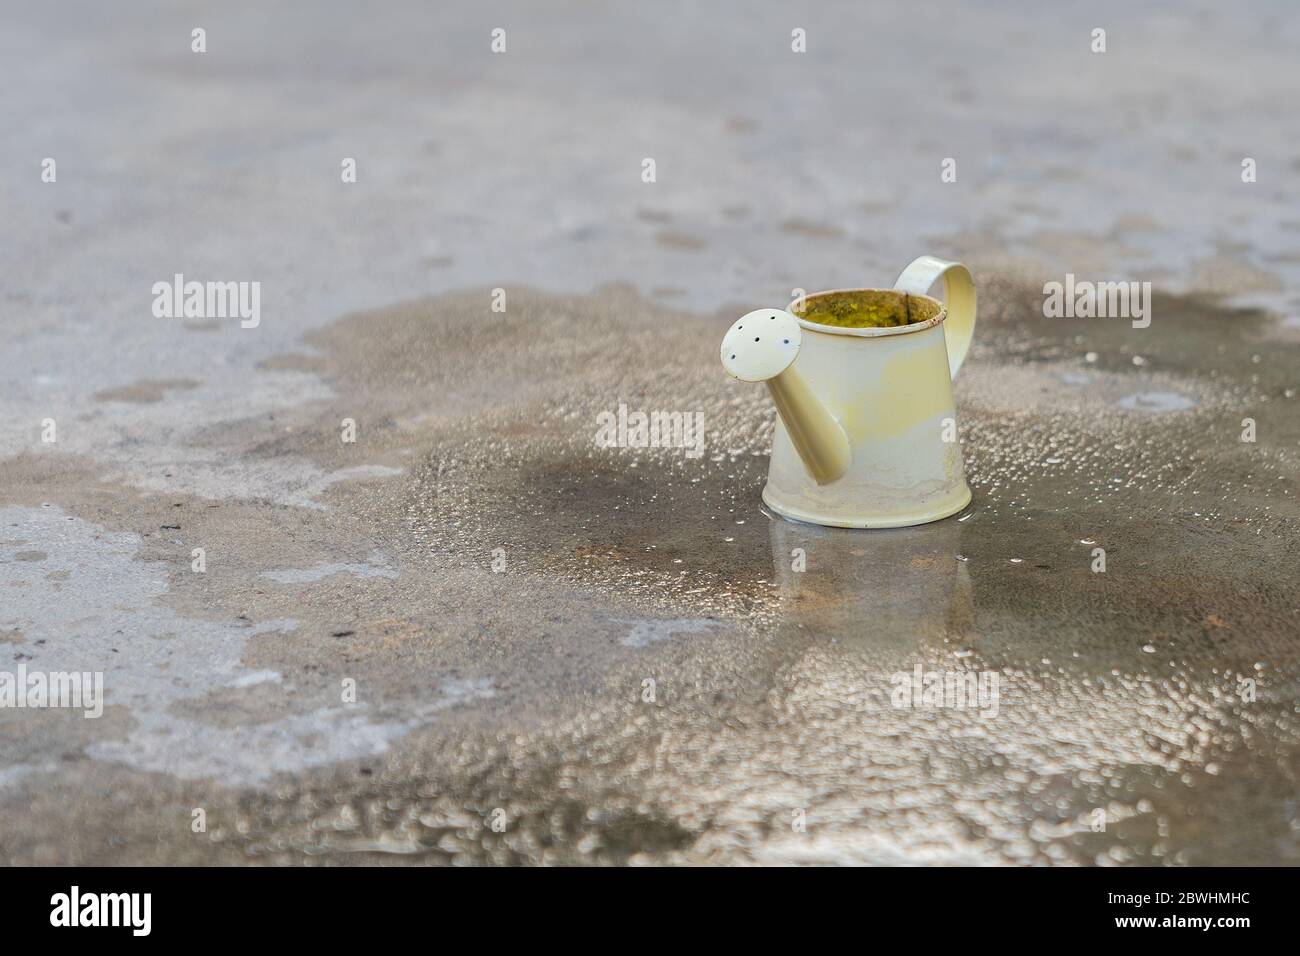 Small yellow watering bucket in vintage style. Stock Photo